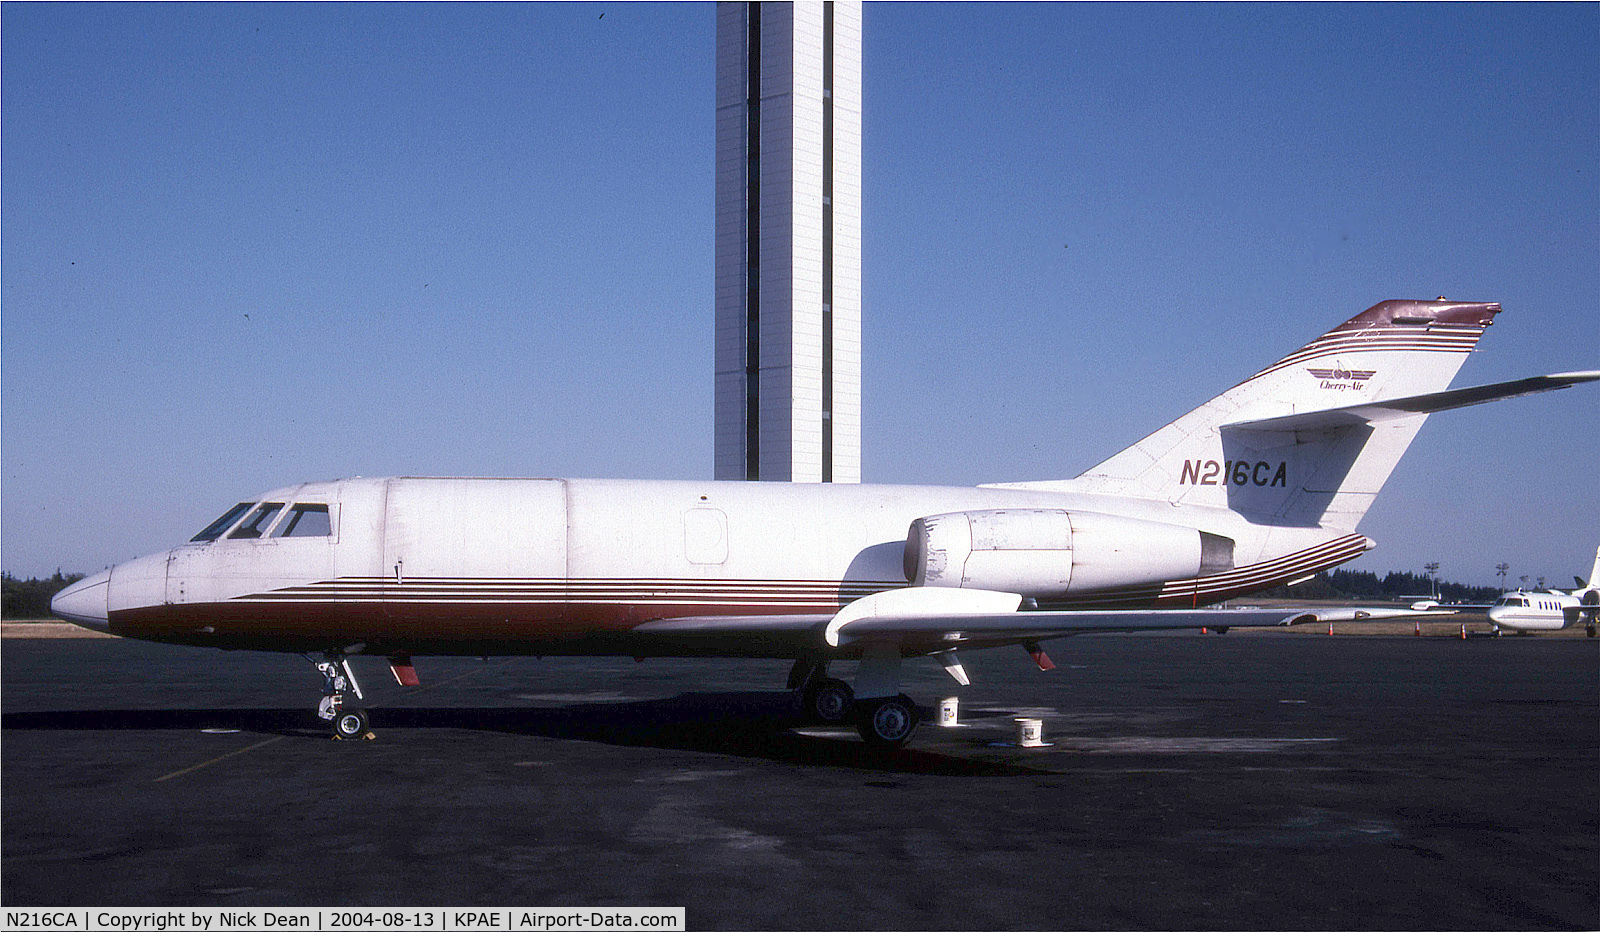 N216CA, 1965 Dassault Falcon 20C C/N 11, KPAE (Previous ID's carried by this airframe as follows F-WMKH, N808F, CF-SRZ, N2200M, N220CM, N30CC, N30CQ, N4351M, N4351N, N409PC, OO-DDD, N983AJ and finally as posted N216CA of Cherry Air this airframe is now WFU)